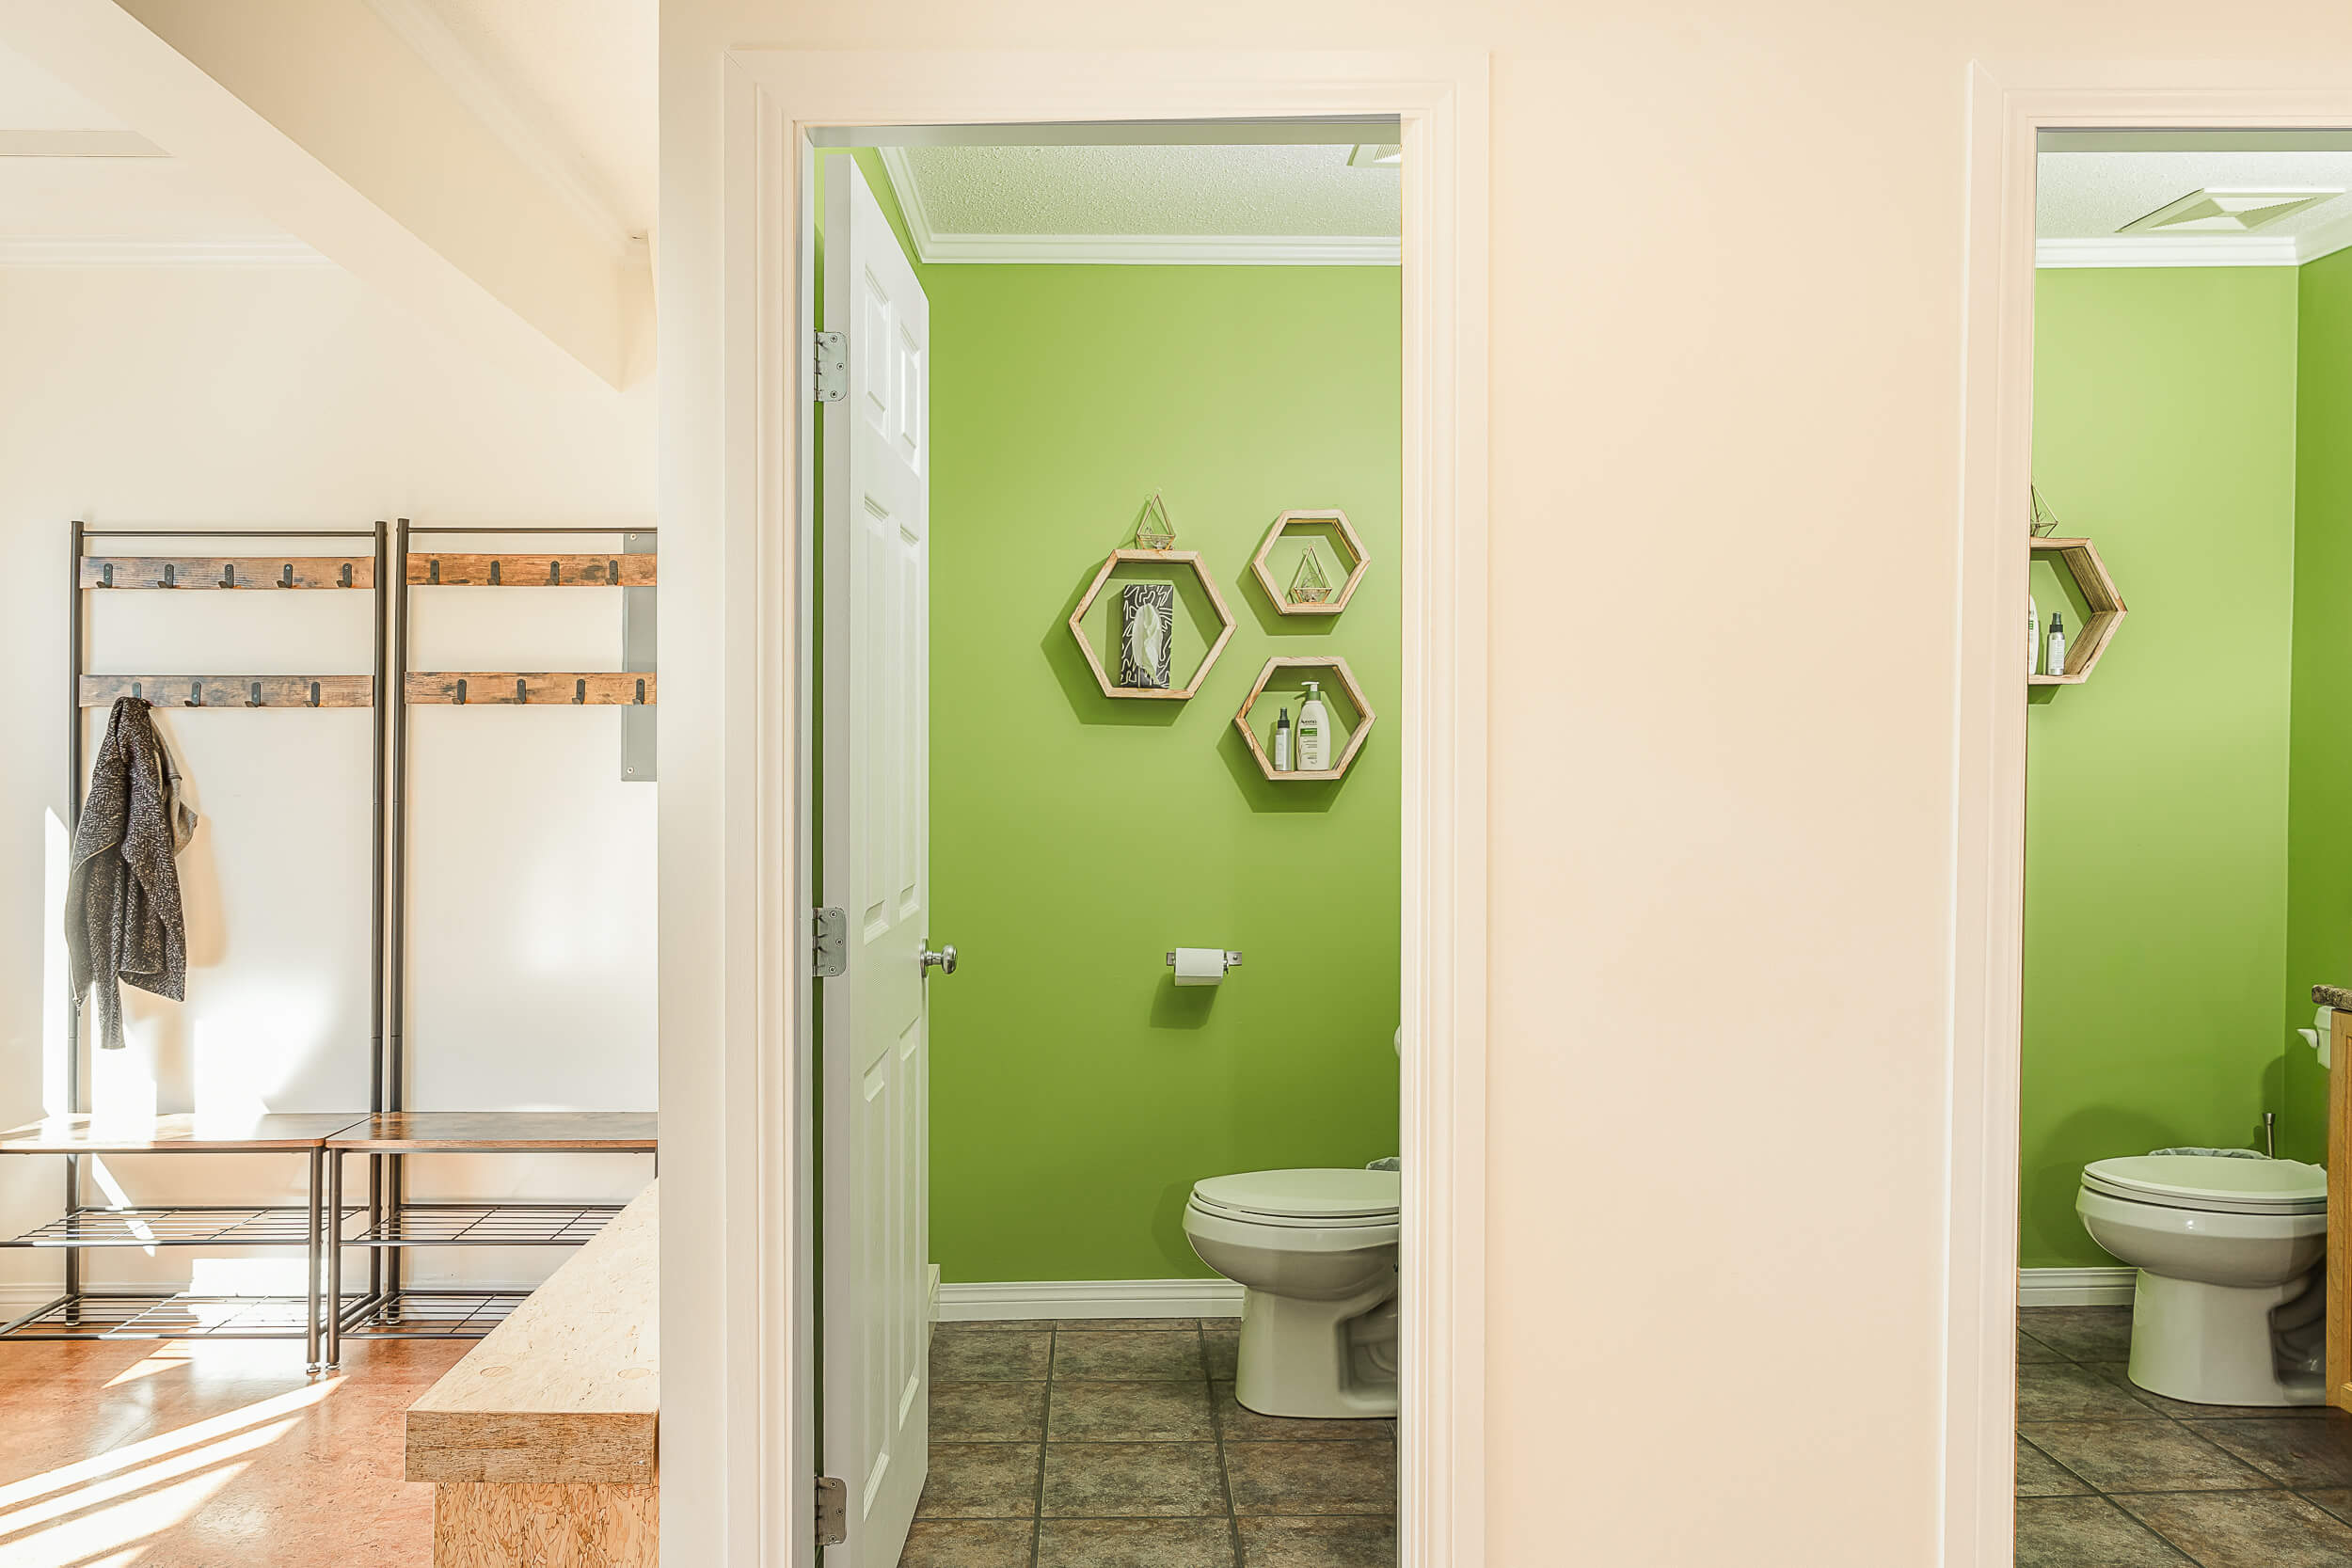 Clean and bright restroom facilities at Shala Yoga studio in Squamish with vibrant green walls, modern hexagon-shaped mirrors, and eco-friendly products on display, reflecting the studio's commitment to sustainability and comfort for its members.